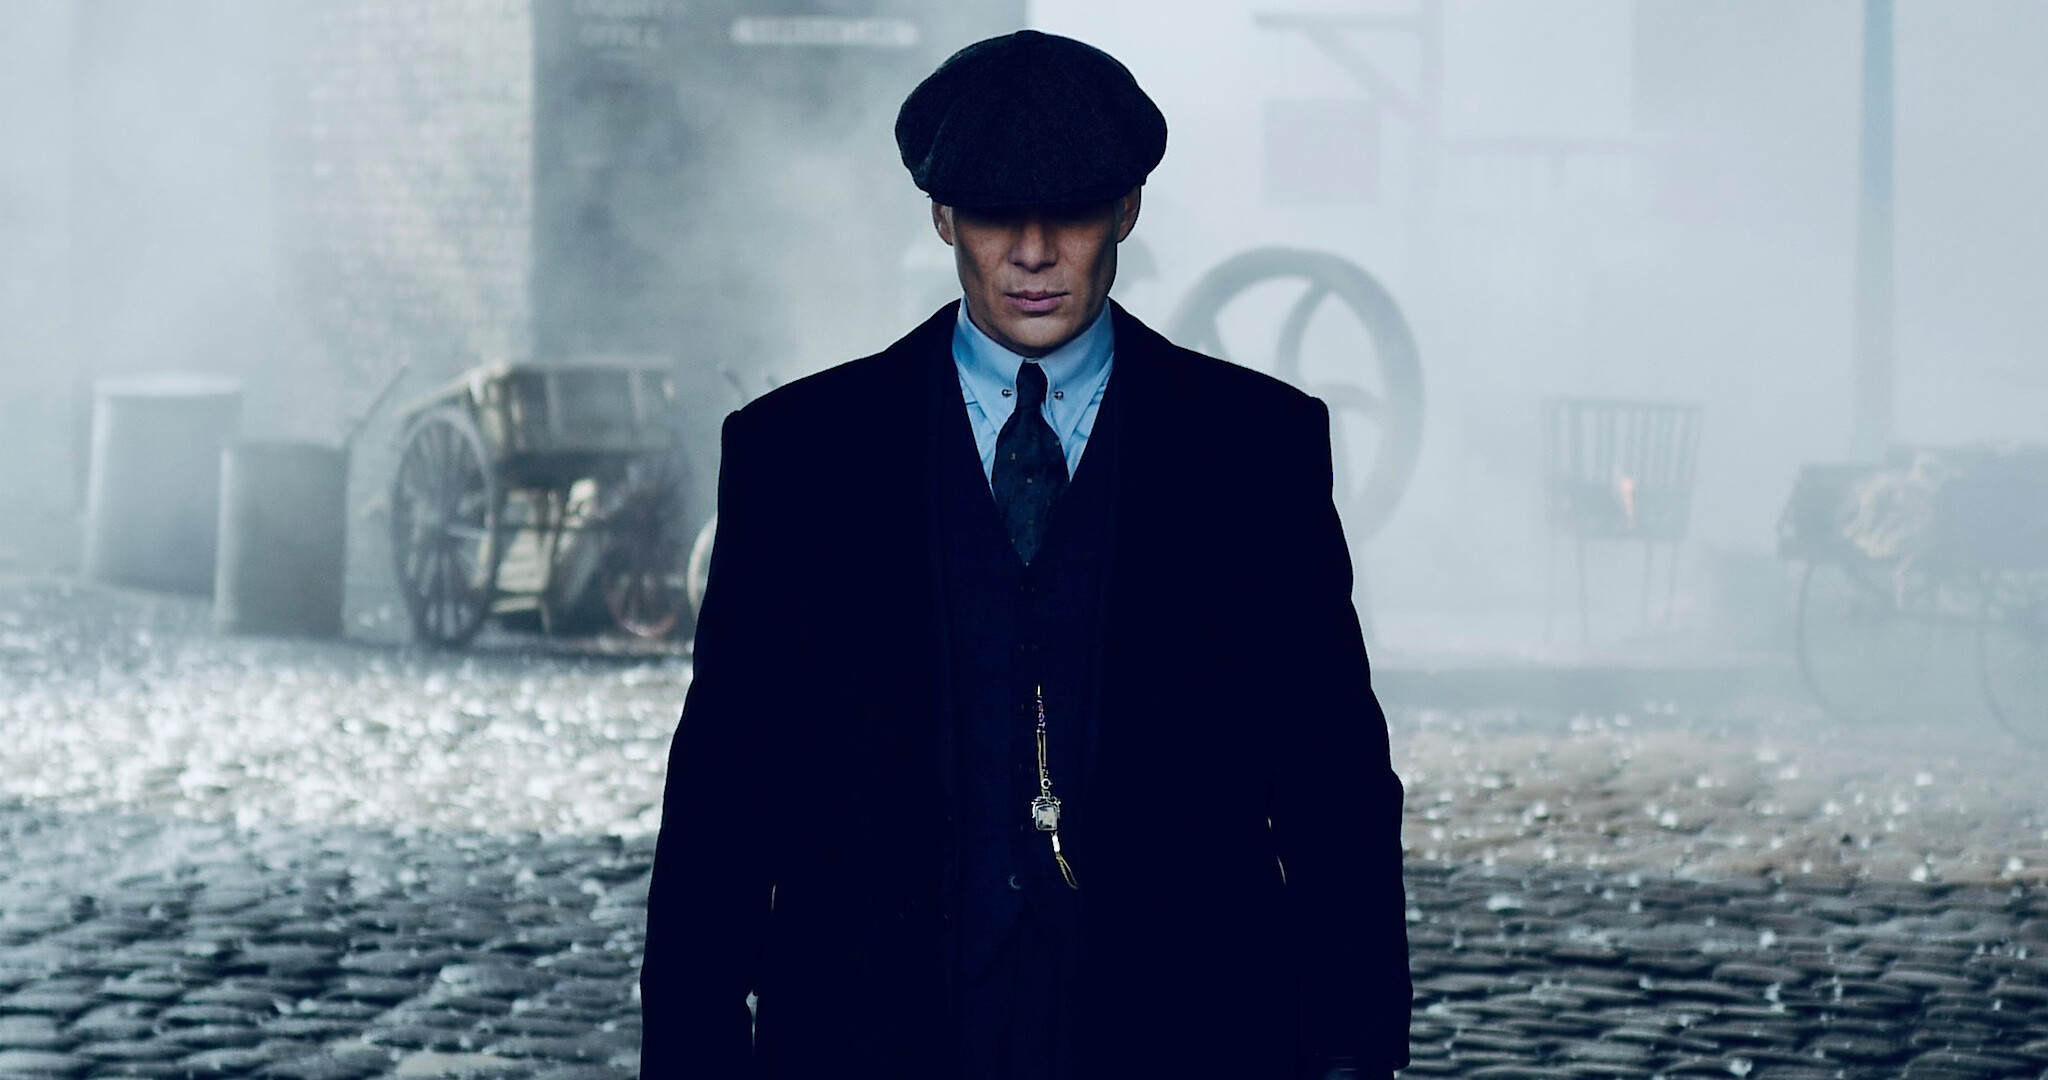 Peaky Blinders: Everything you need to know about the Shelby